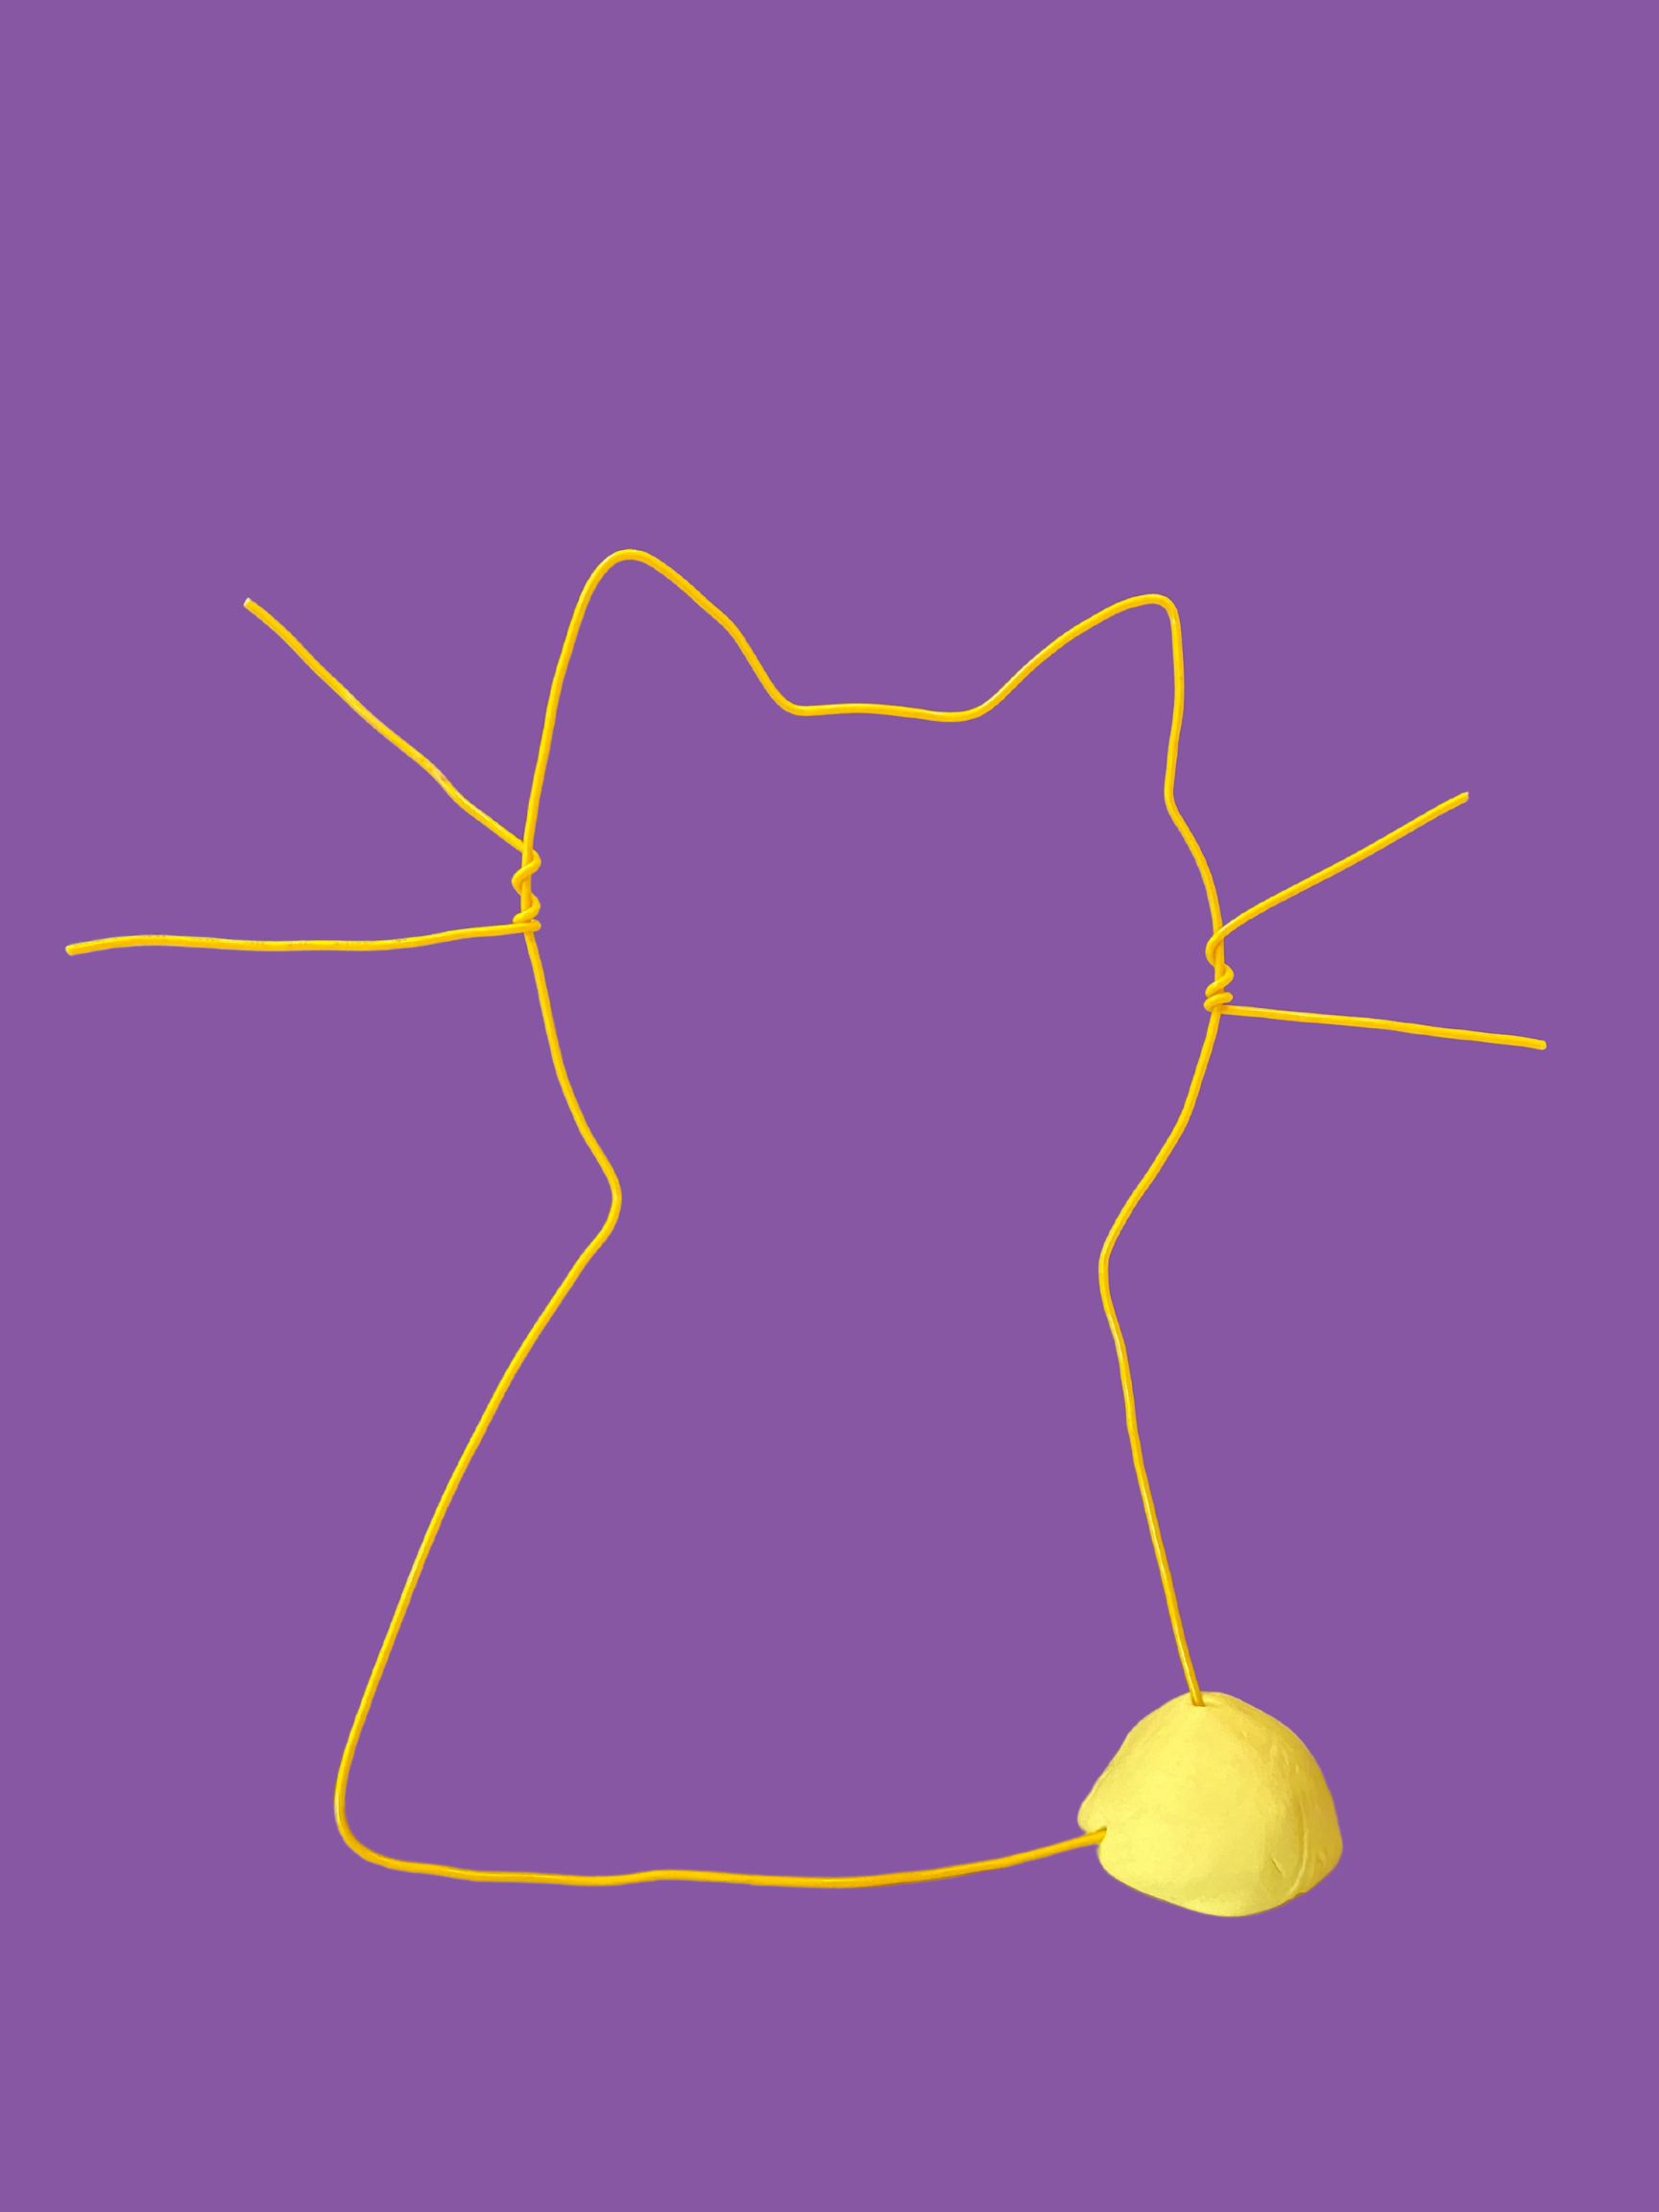 Image of wire cat.